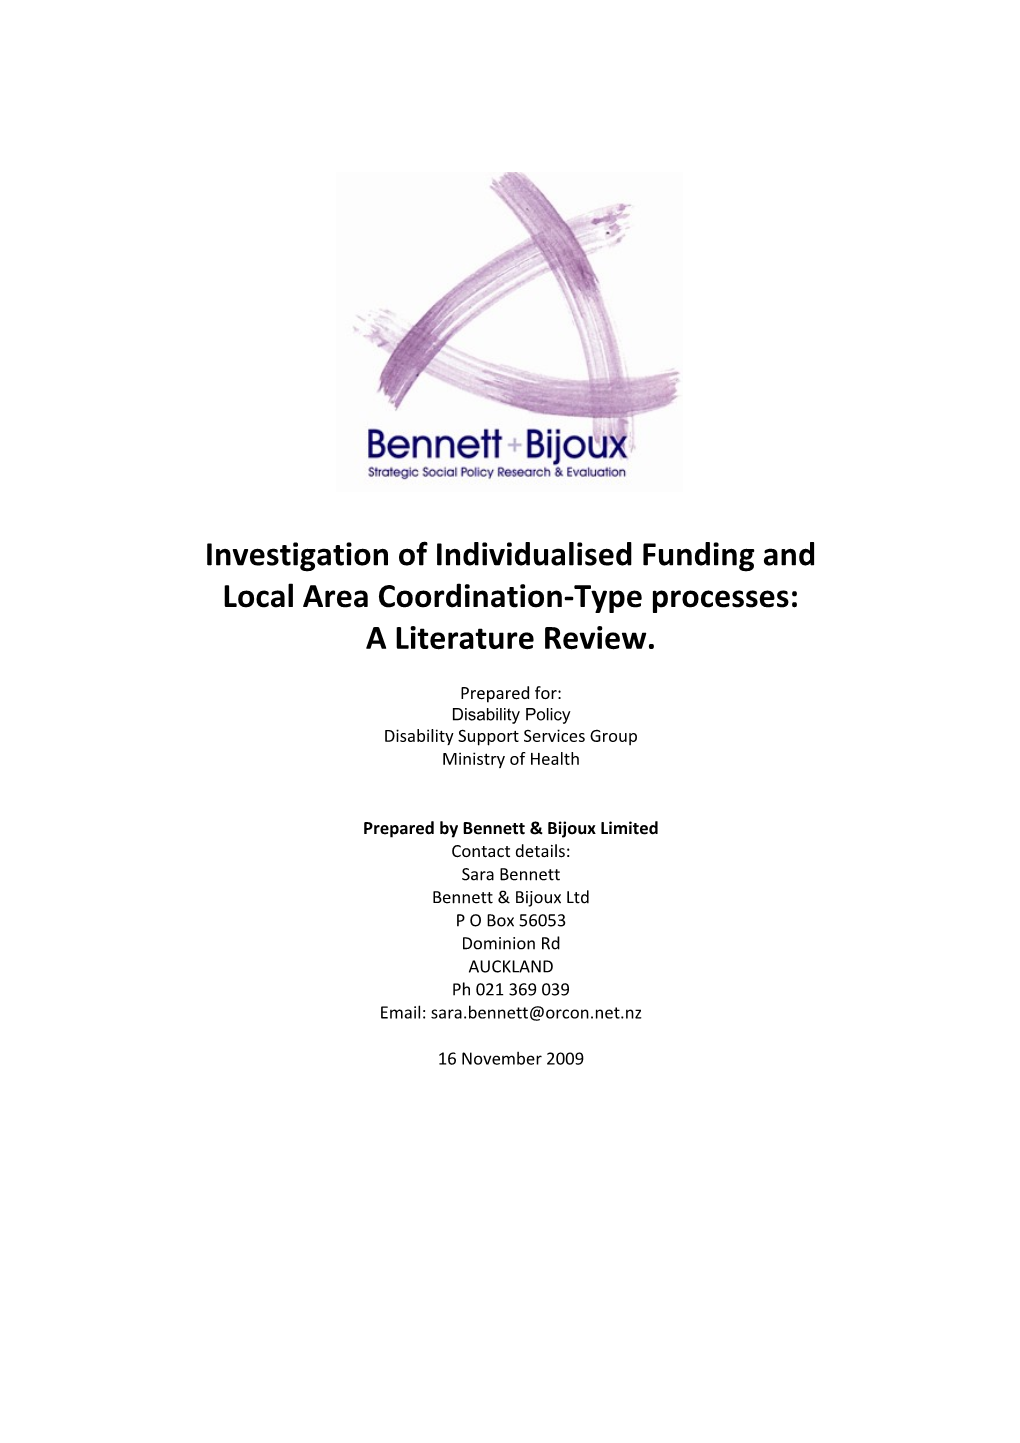 Investigation of Individualised Funding And